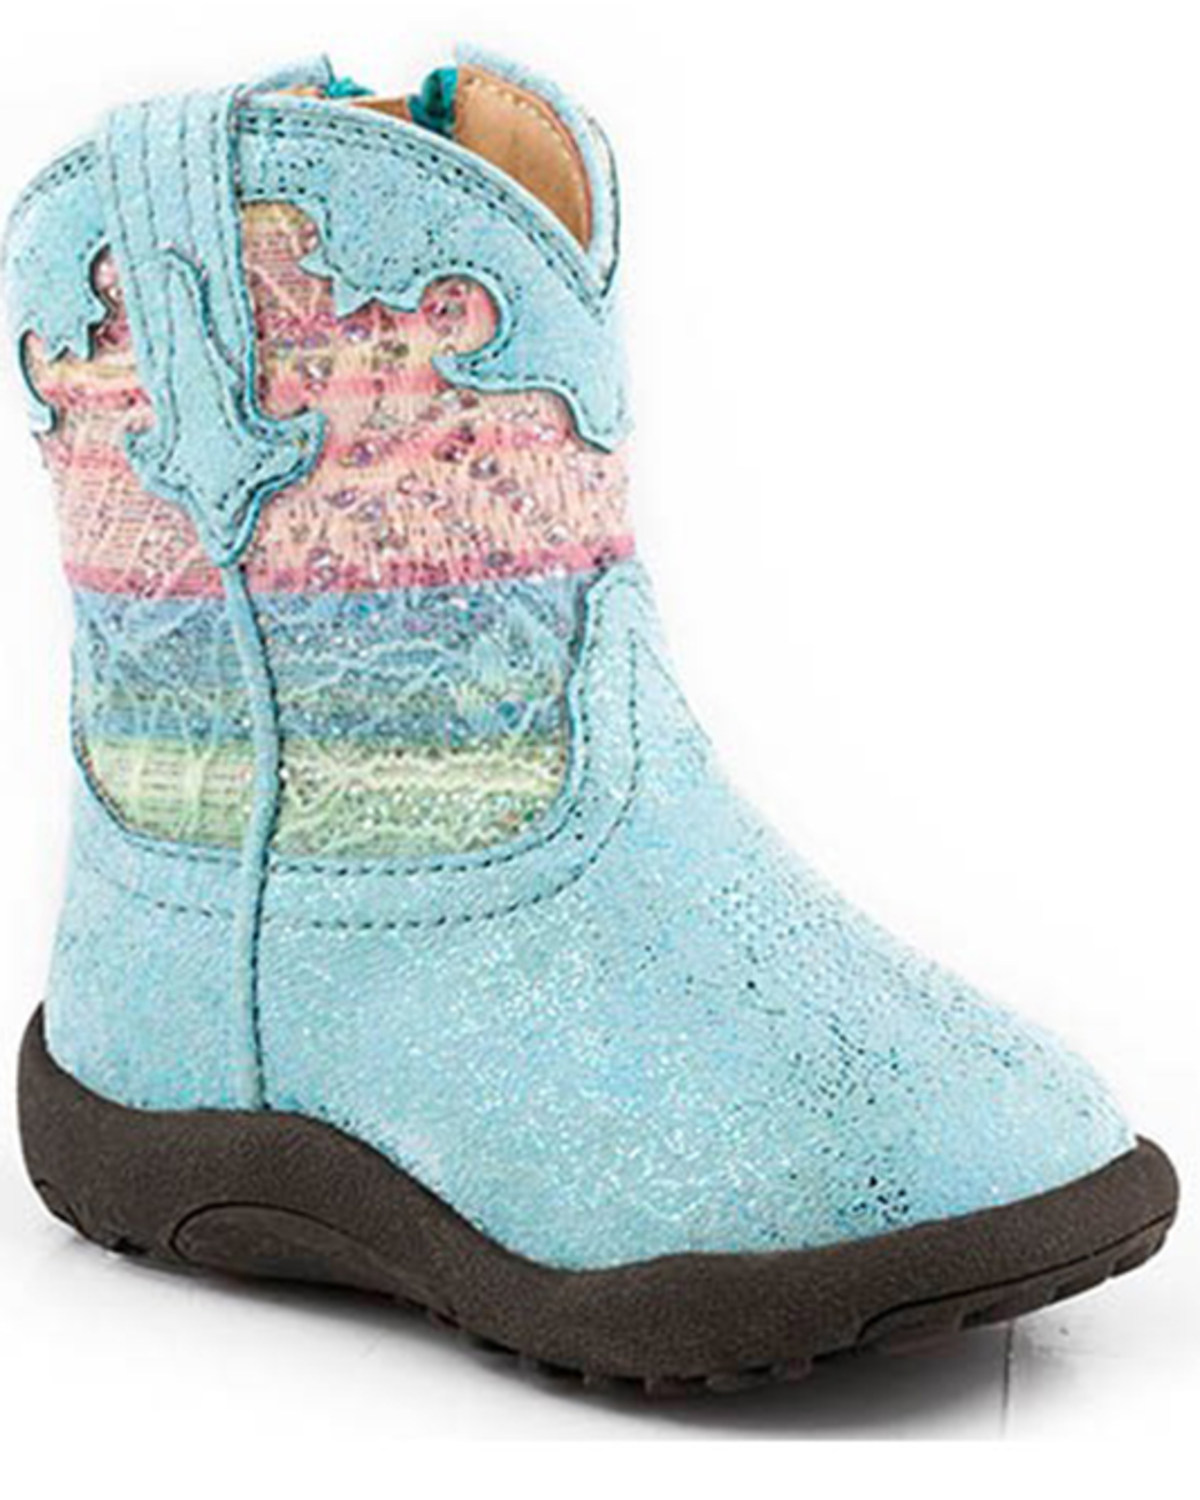 Roper Infant Girls' Cowbabies Glitter Lace Western Boots - Broad Square Toe